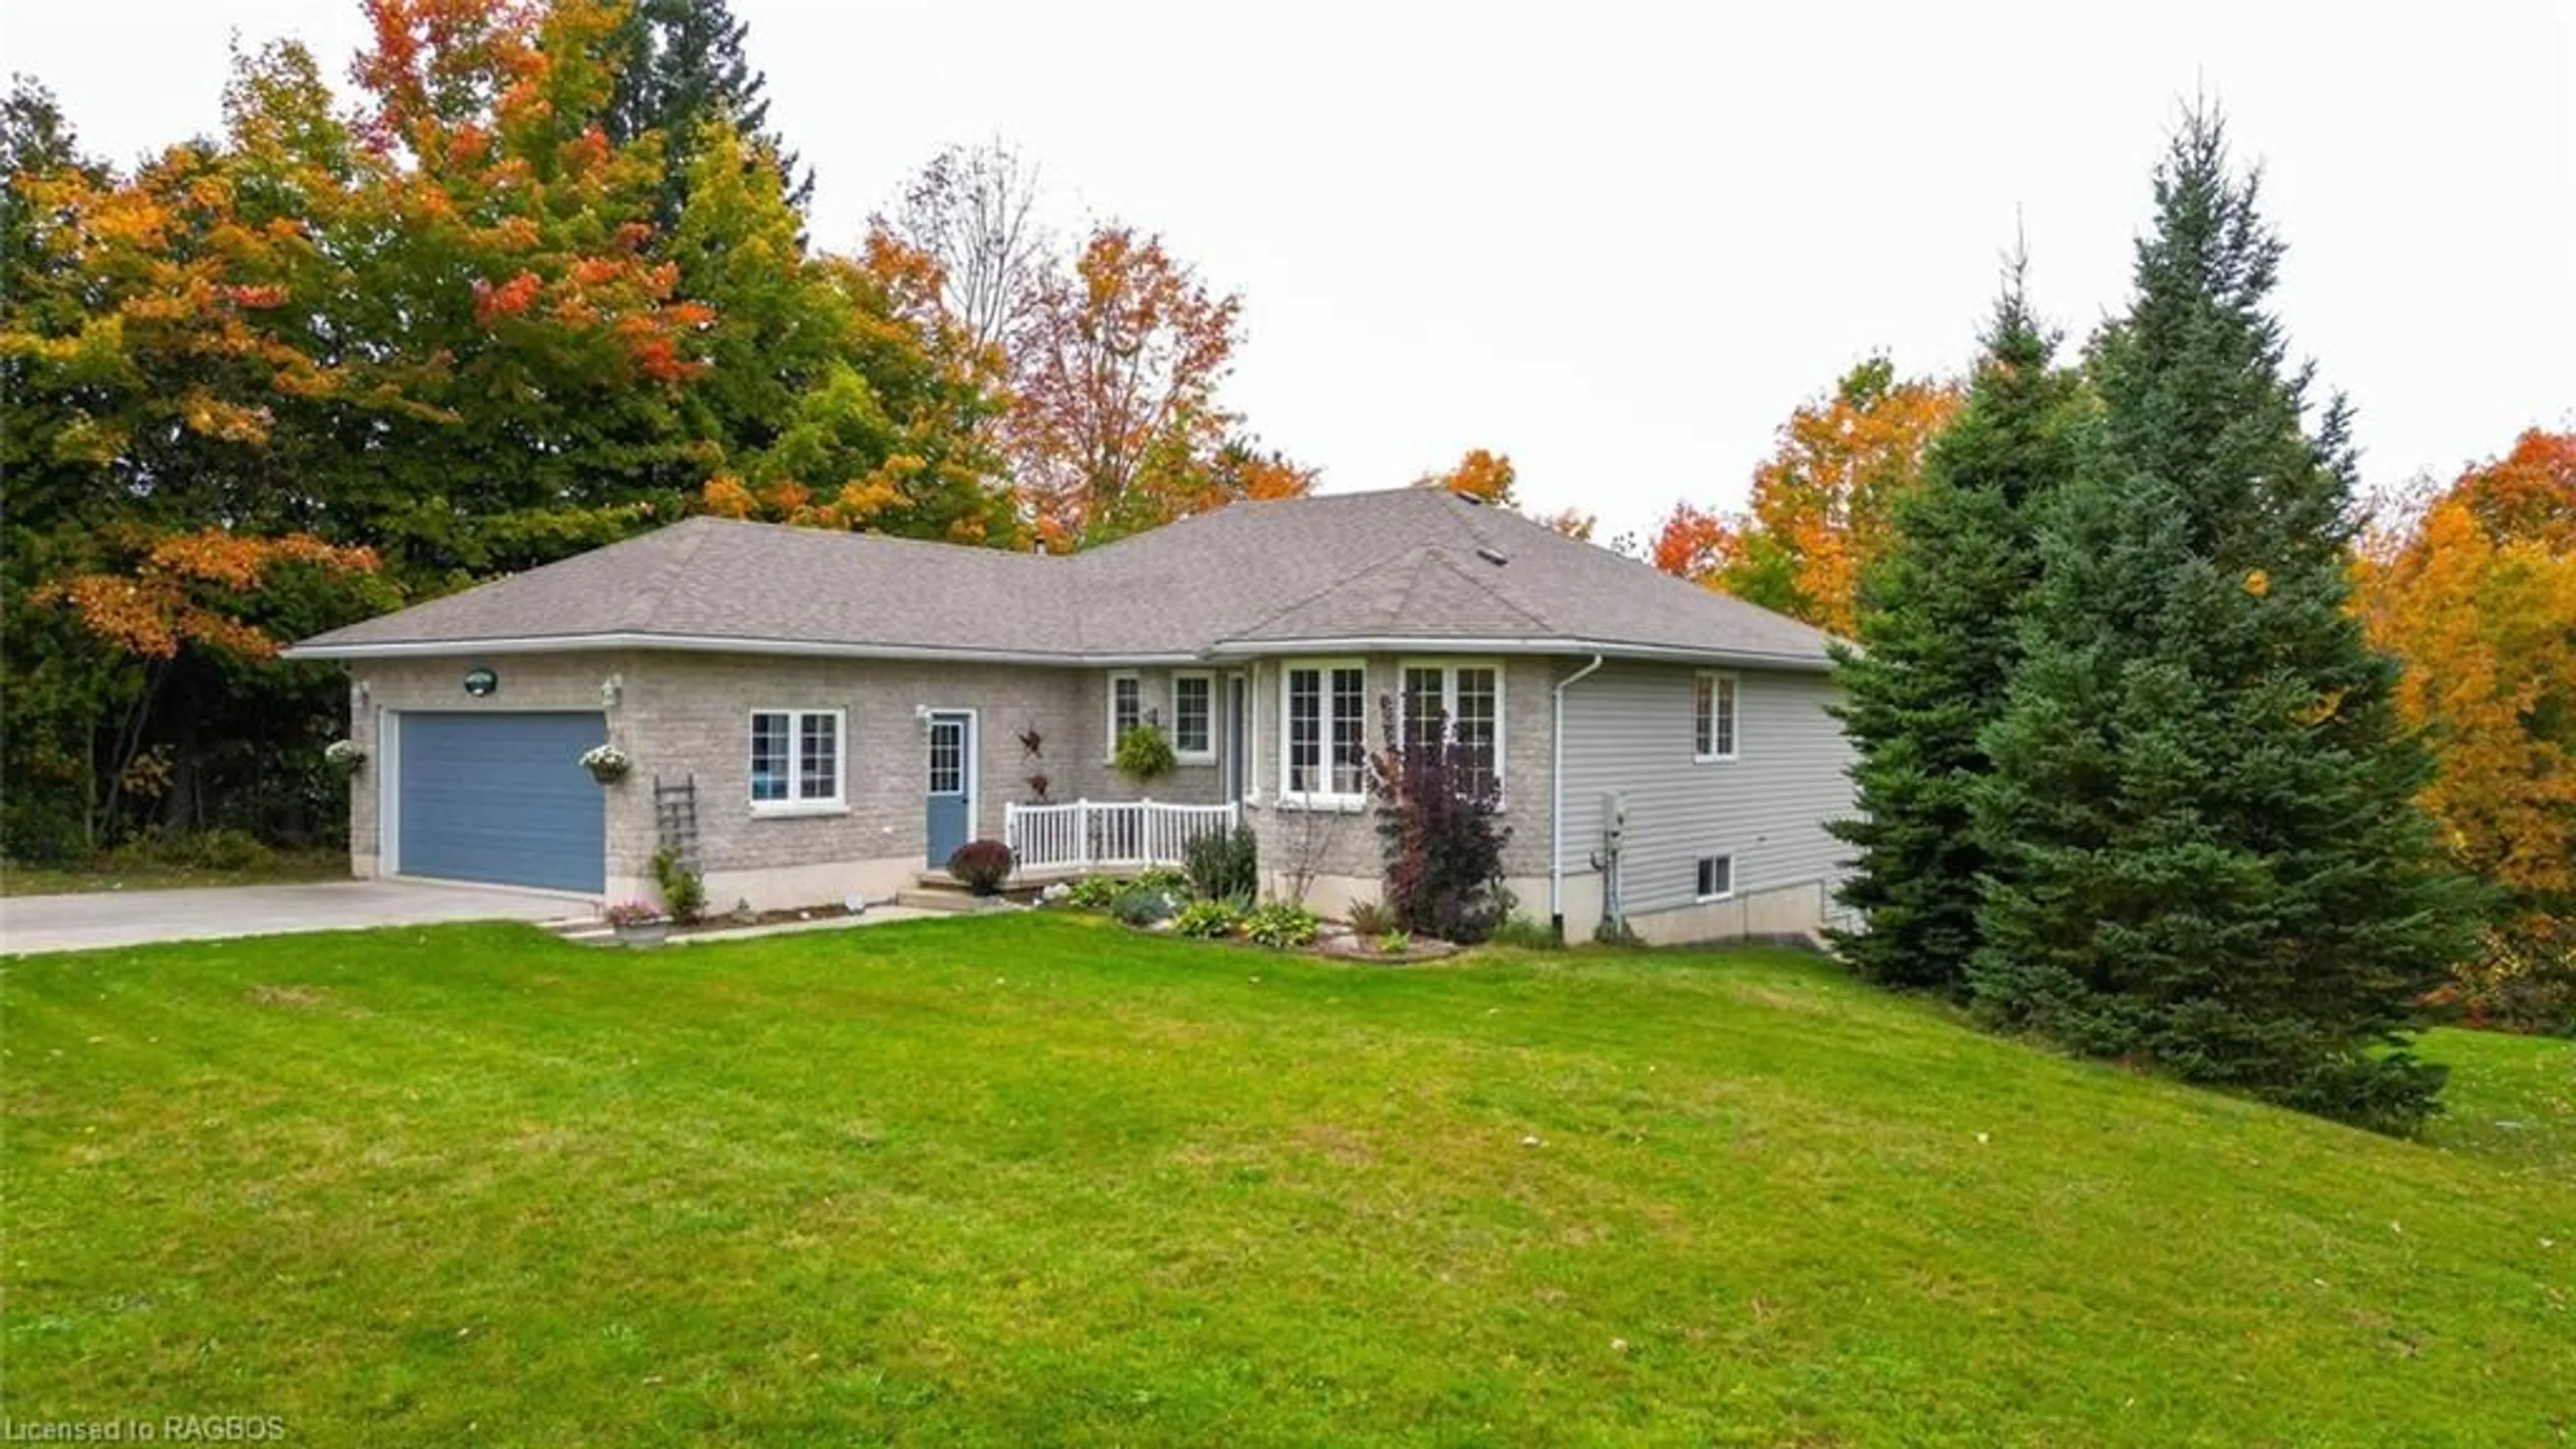 Frontside or backside of a home for 683355 Chatsworth Rd 24, Chatsworth (Twp) Ontario N0H 2V0